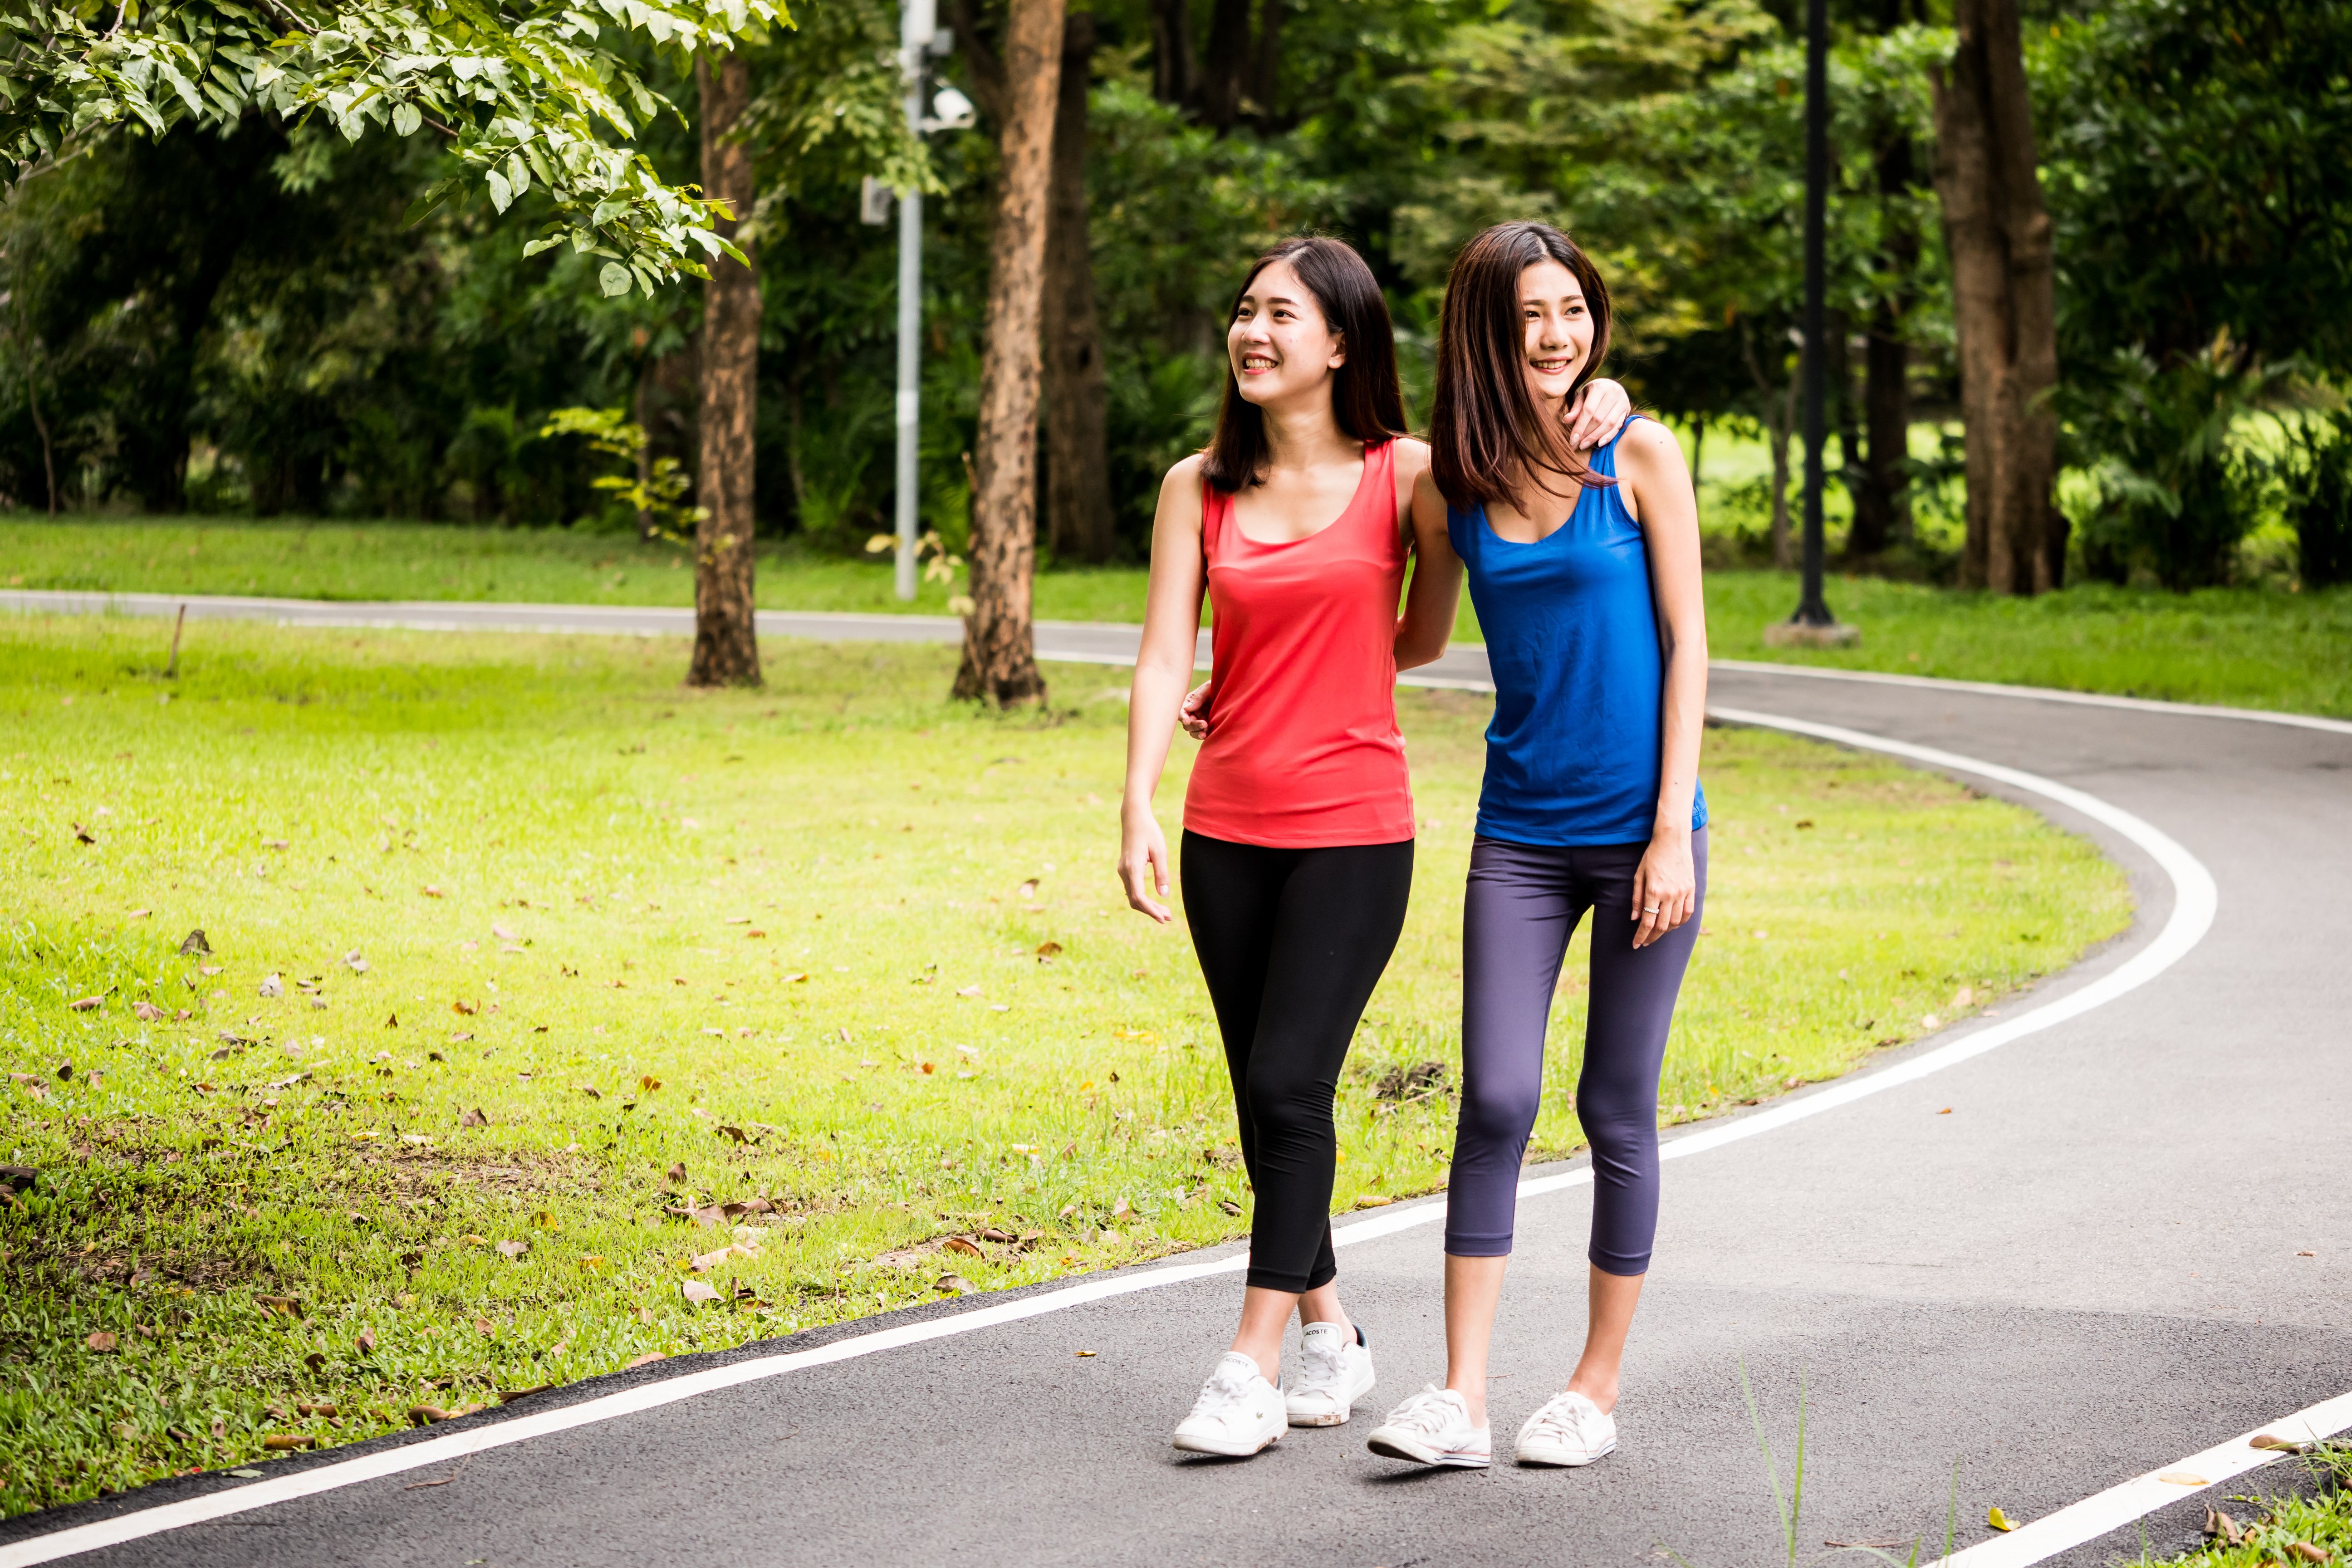 attractive-young-women-walking-after-exercise-in-a-2021-09-04-00-12-30-utc